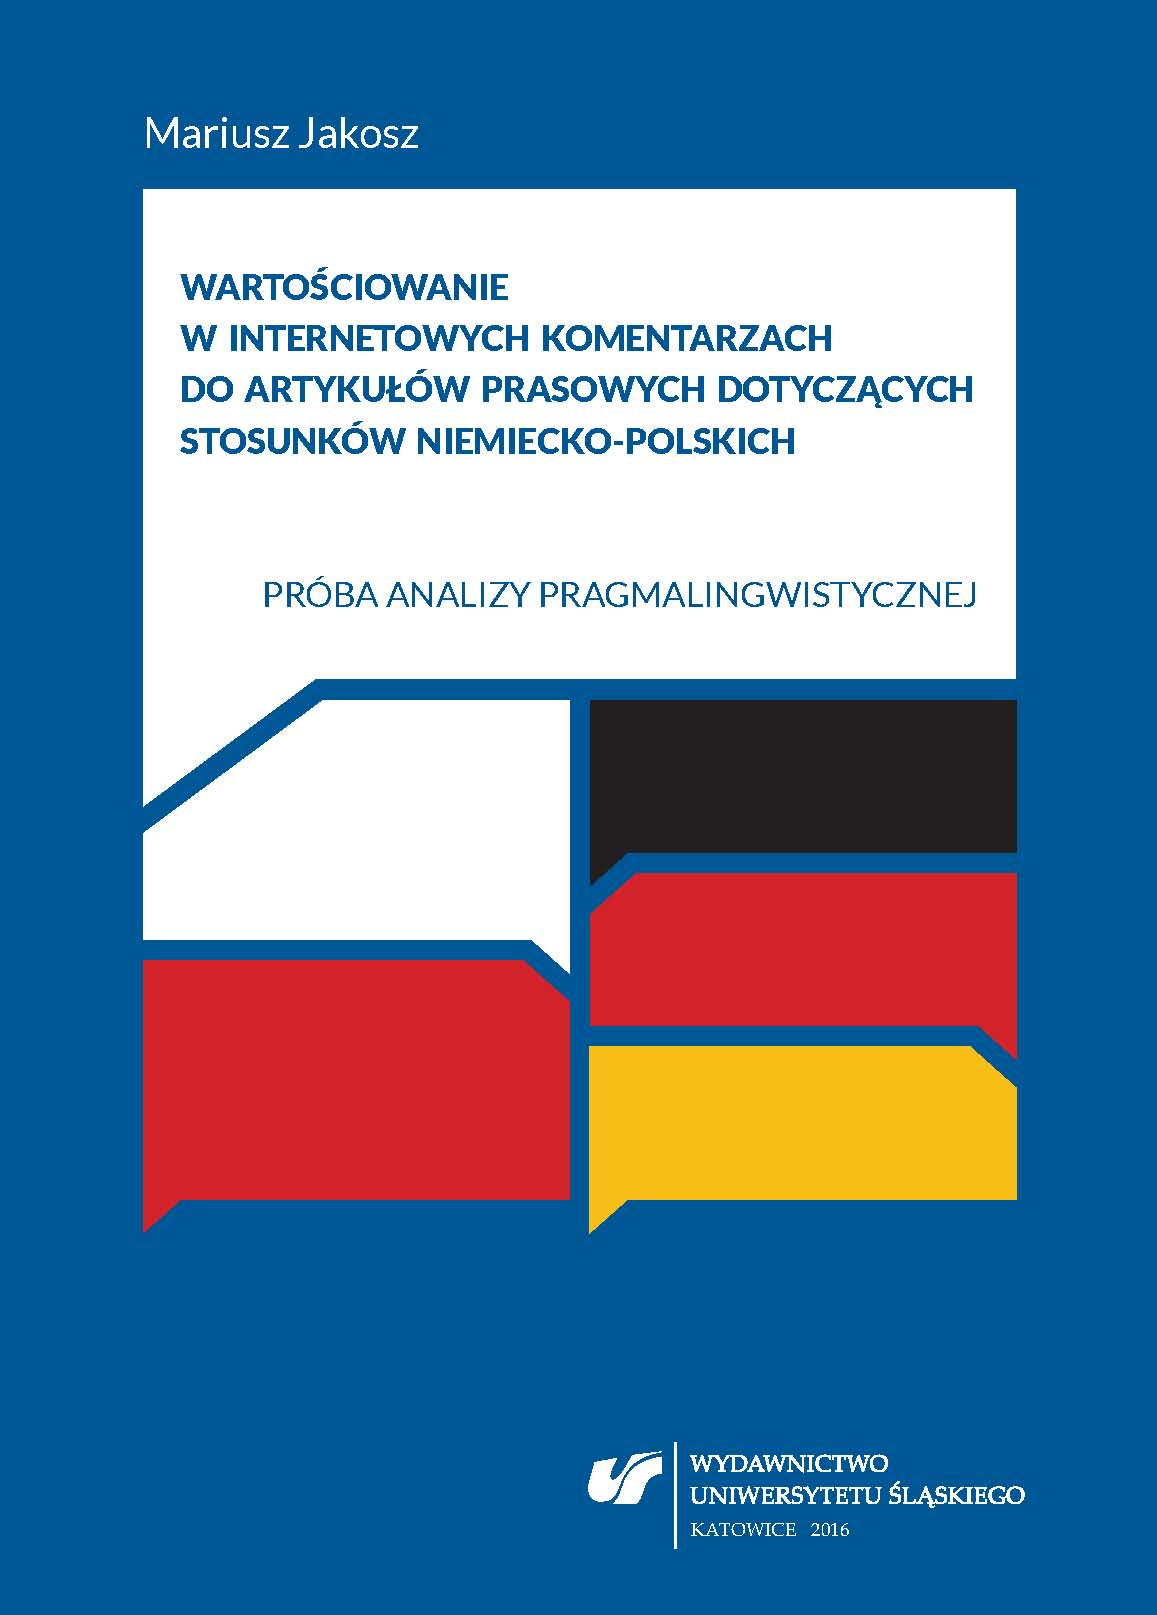 Evaluation in Internet comments on press articles concerning German-Polish relations. An attempt at pragma-linguistic analysis